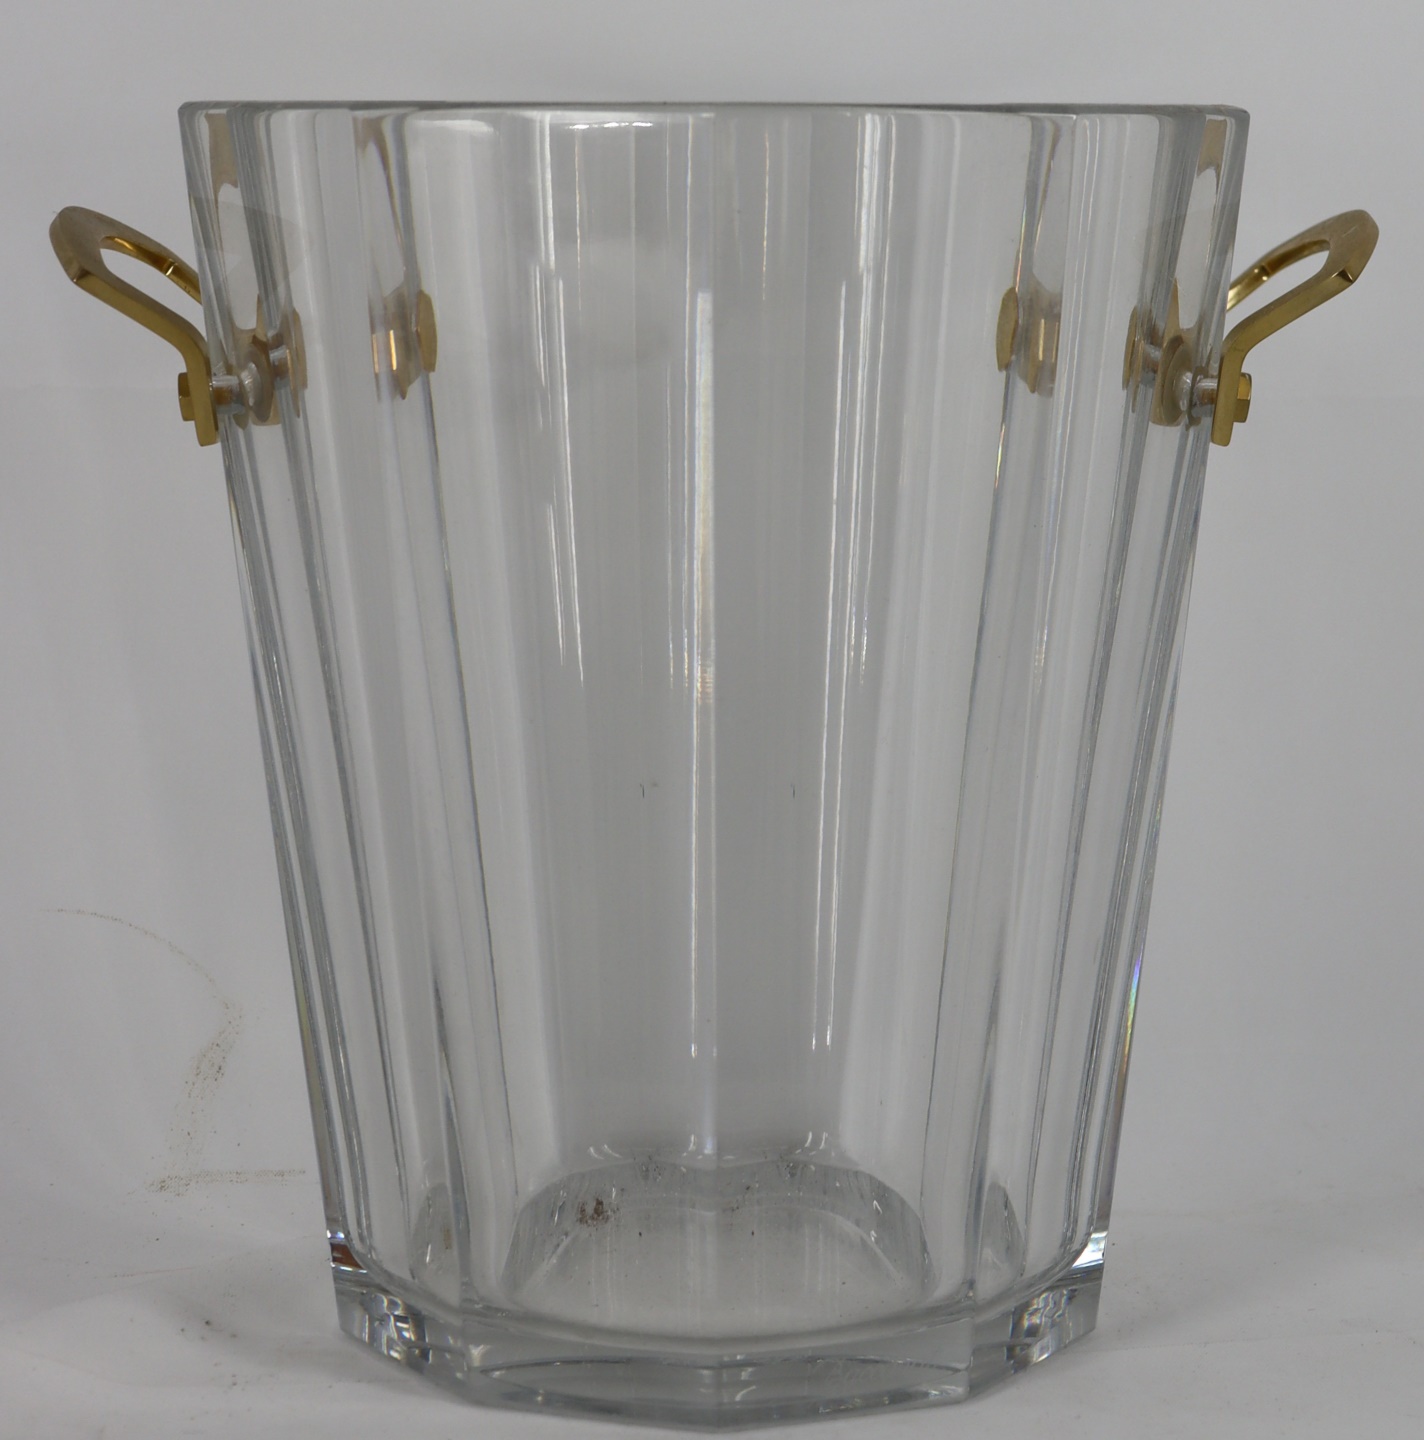 BACCARAT GLASS ICE BUCKET WITH 3b901e